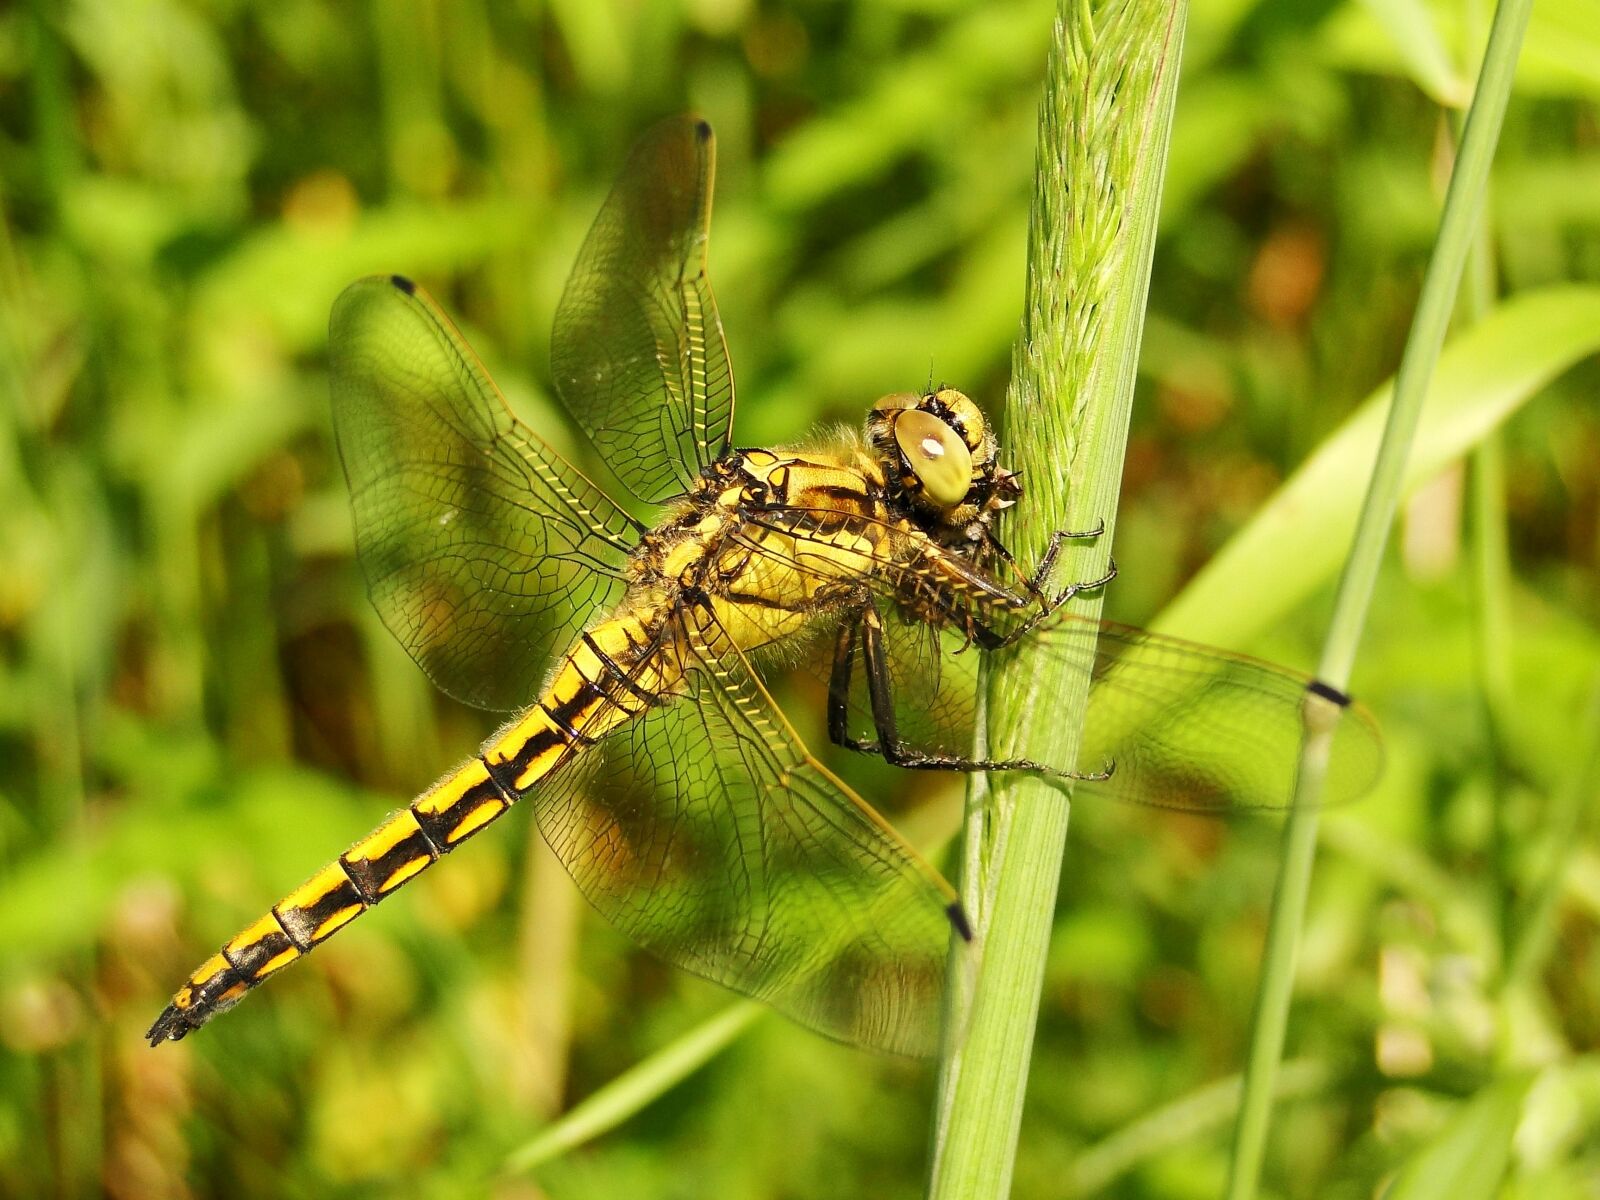 Sony Cyber-shot DSC-HX1 sample photo. Insect, nature, dragonflies r photography